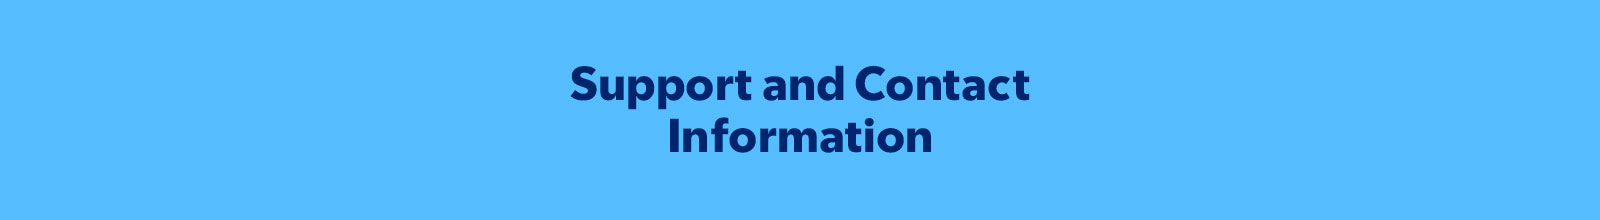 Support and Contact Information